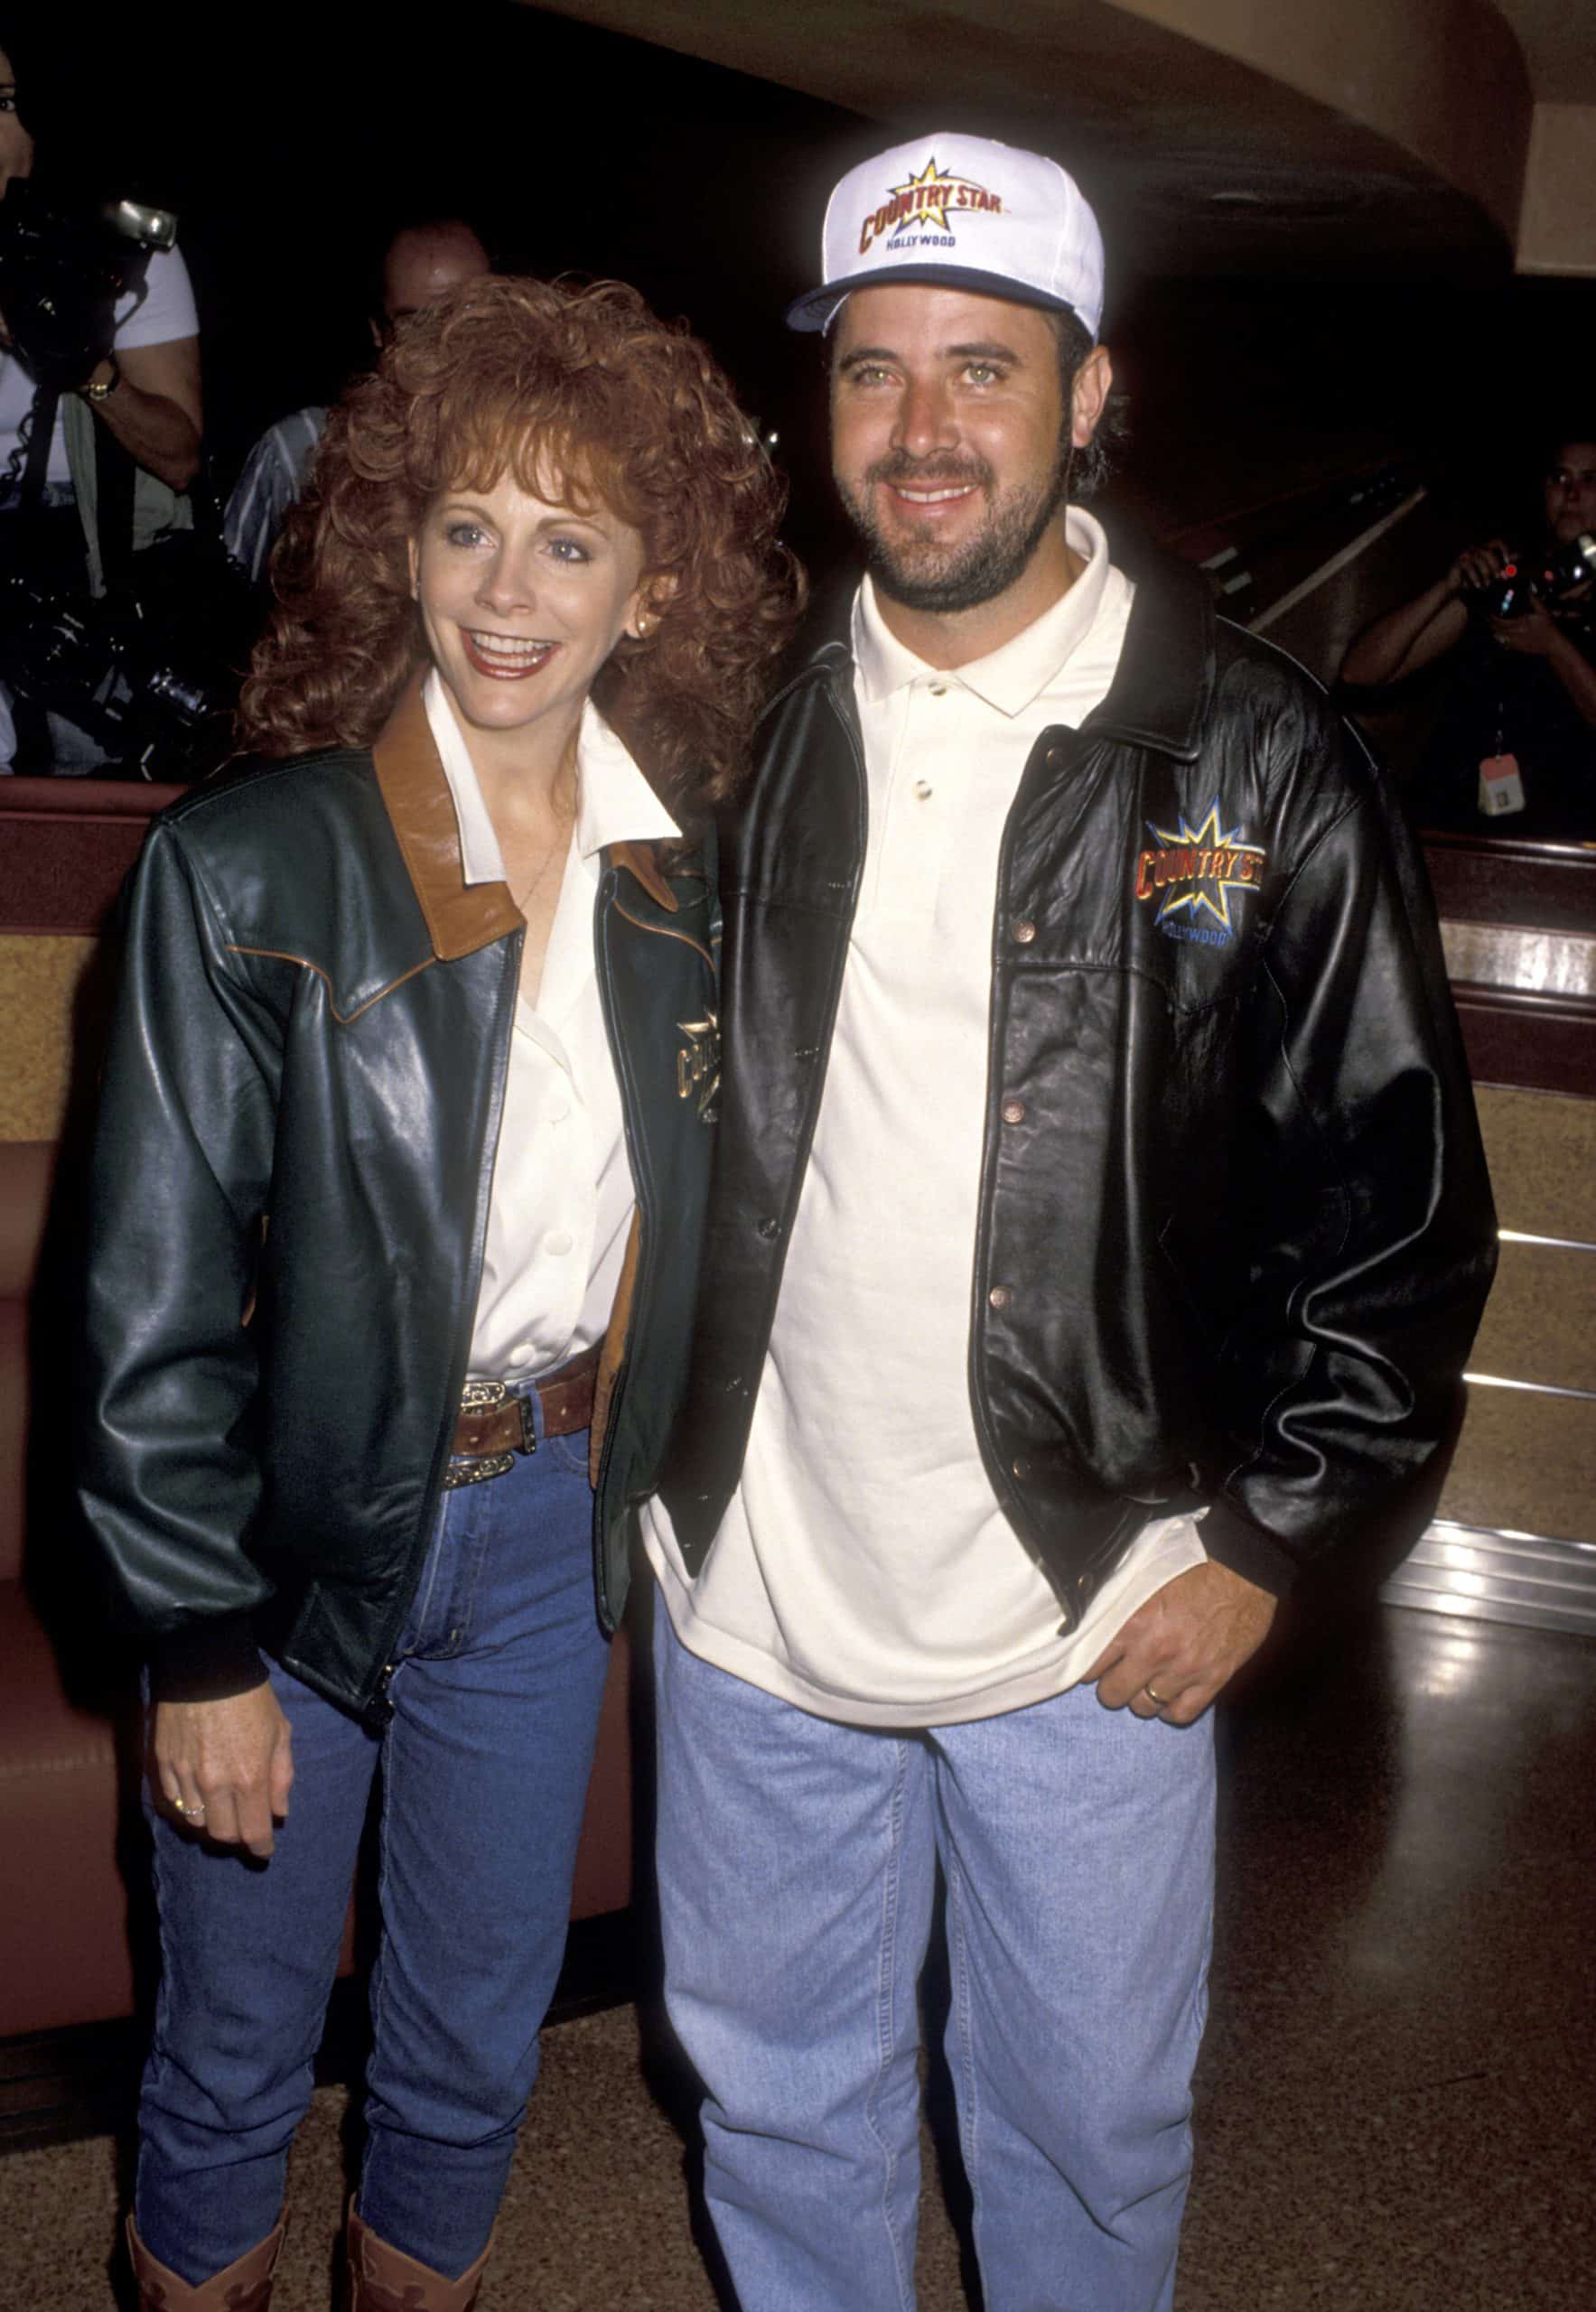 Reba McEntire with Vince Gill in 1994